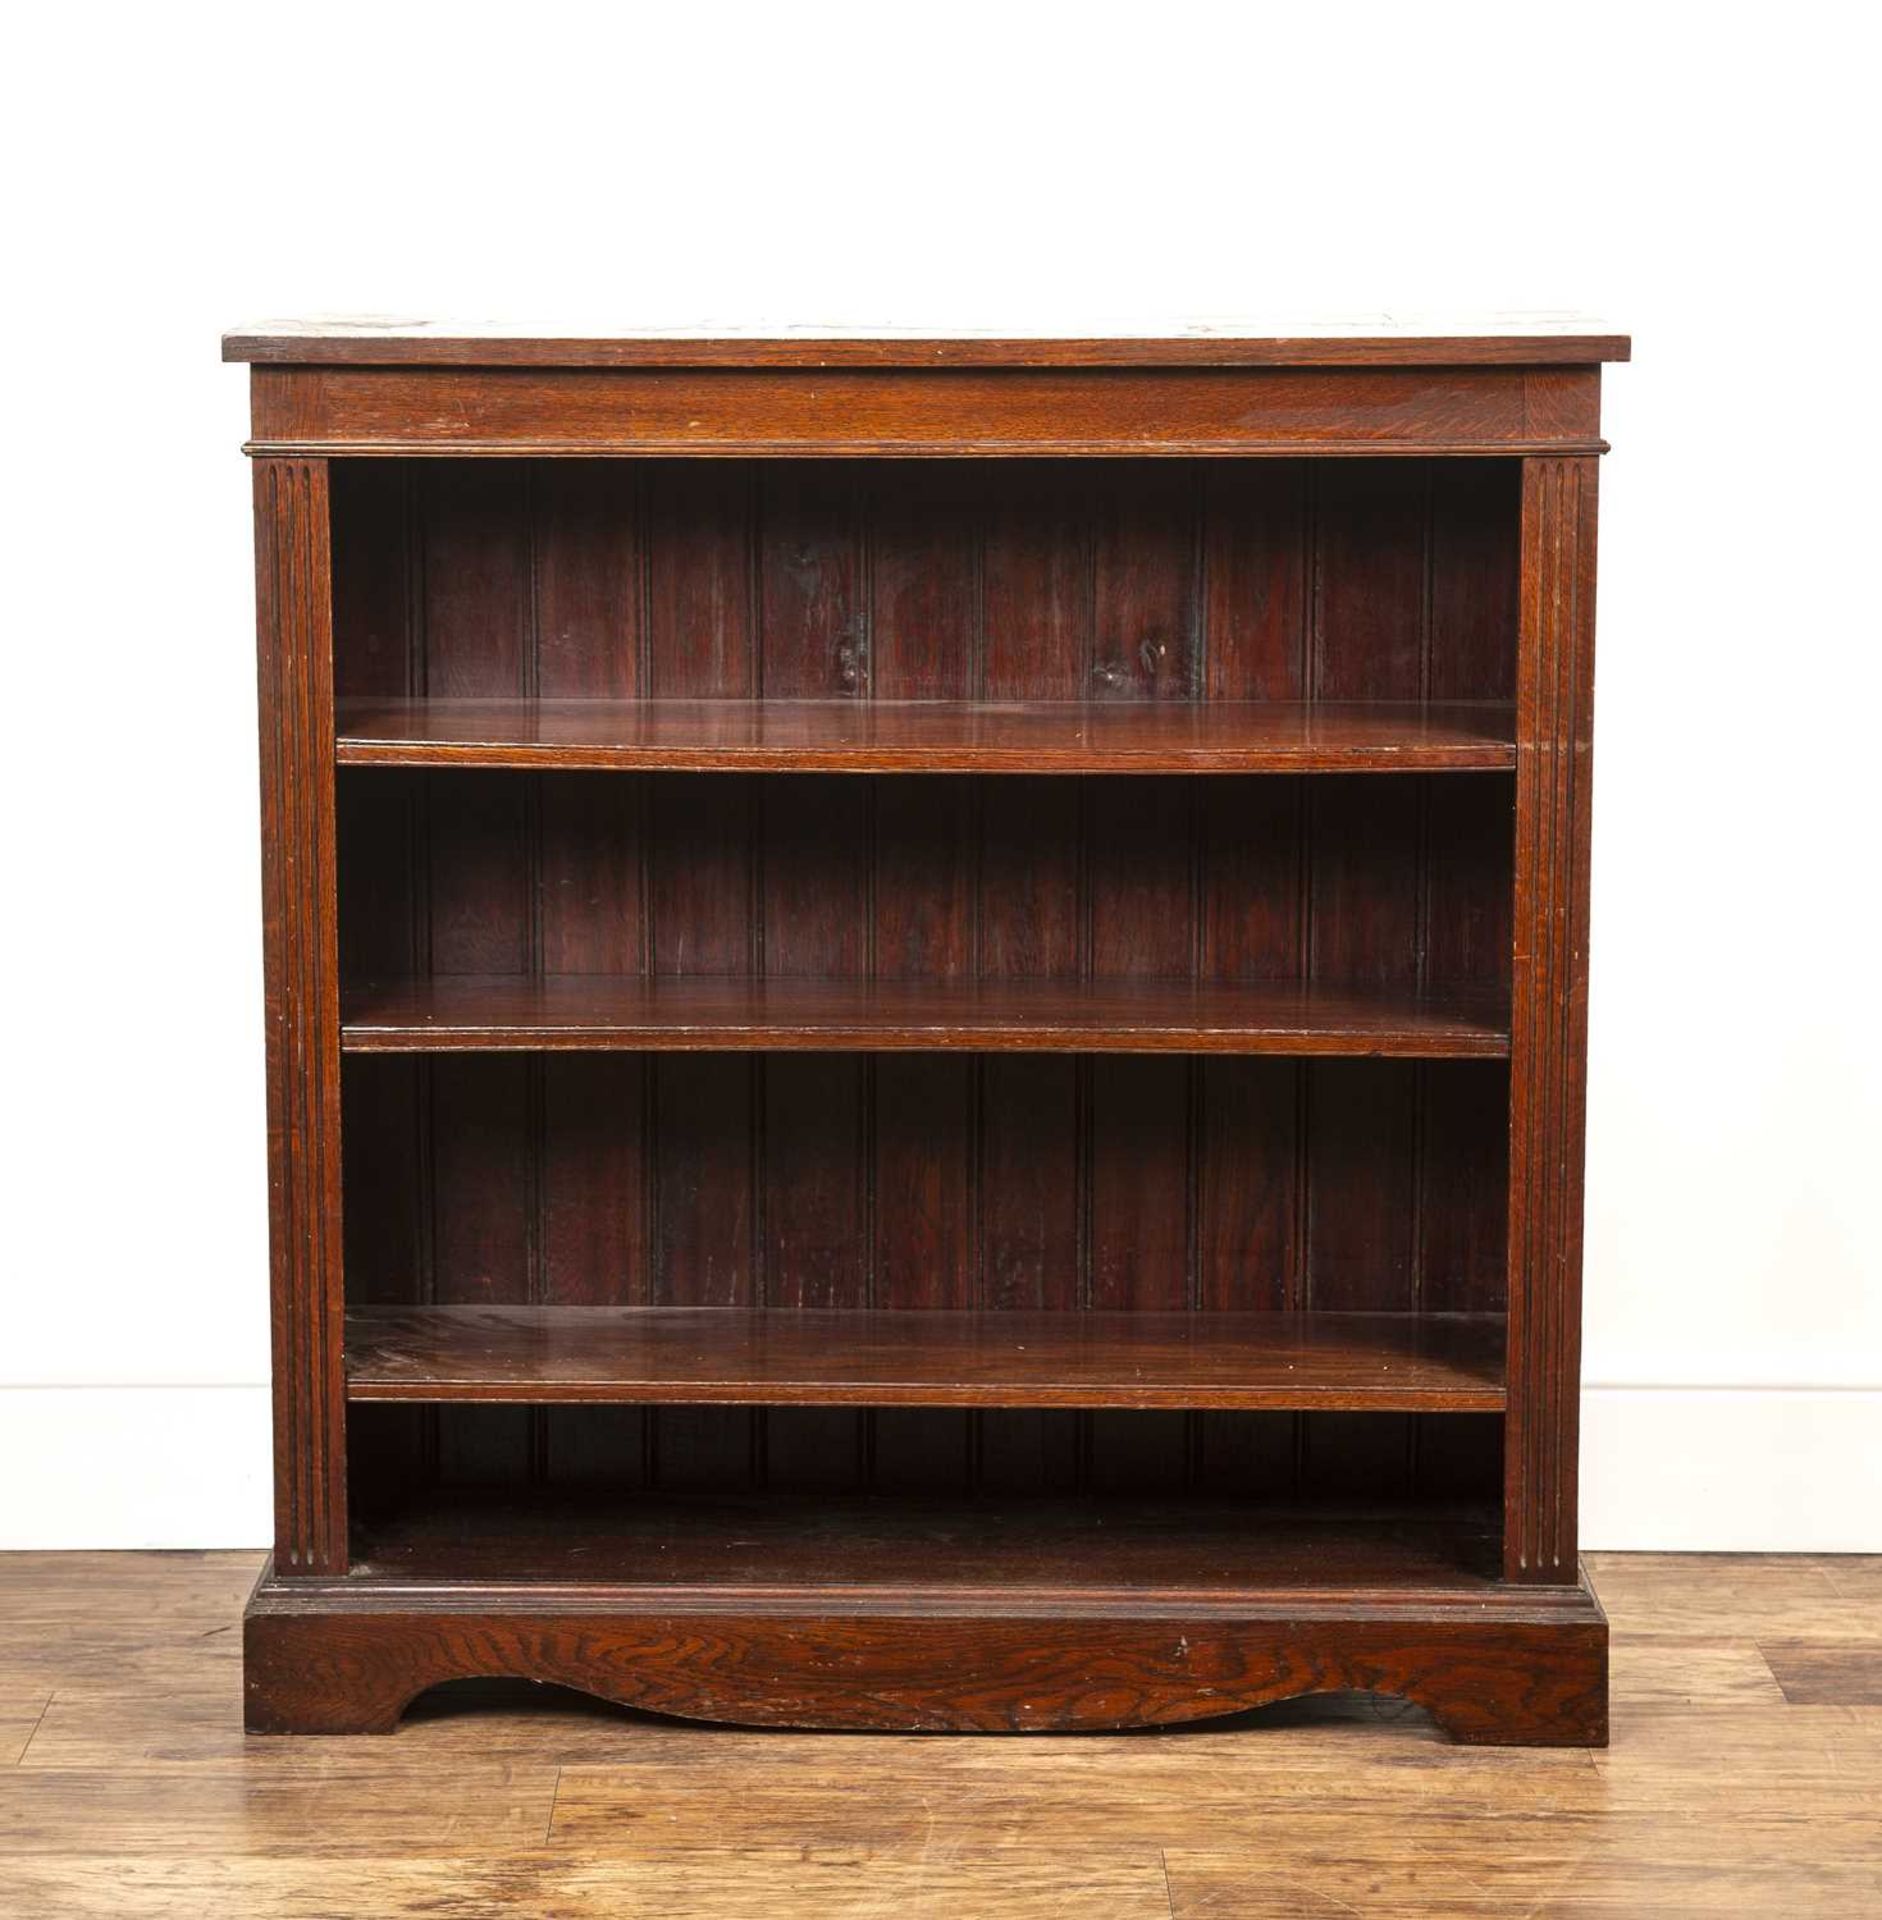 Oak open front bookcase with three height adjustable shelves flanked by reeded effect columns on